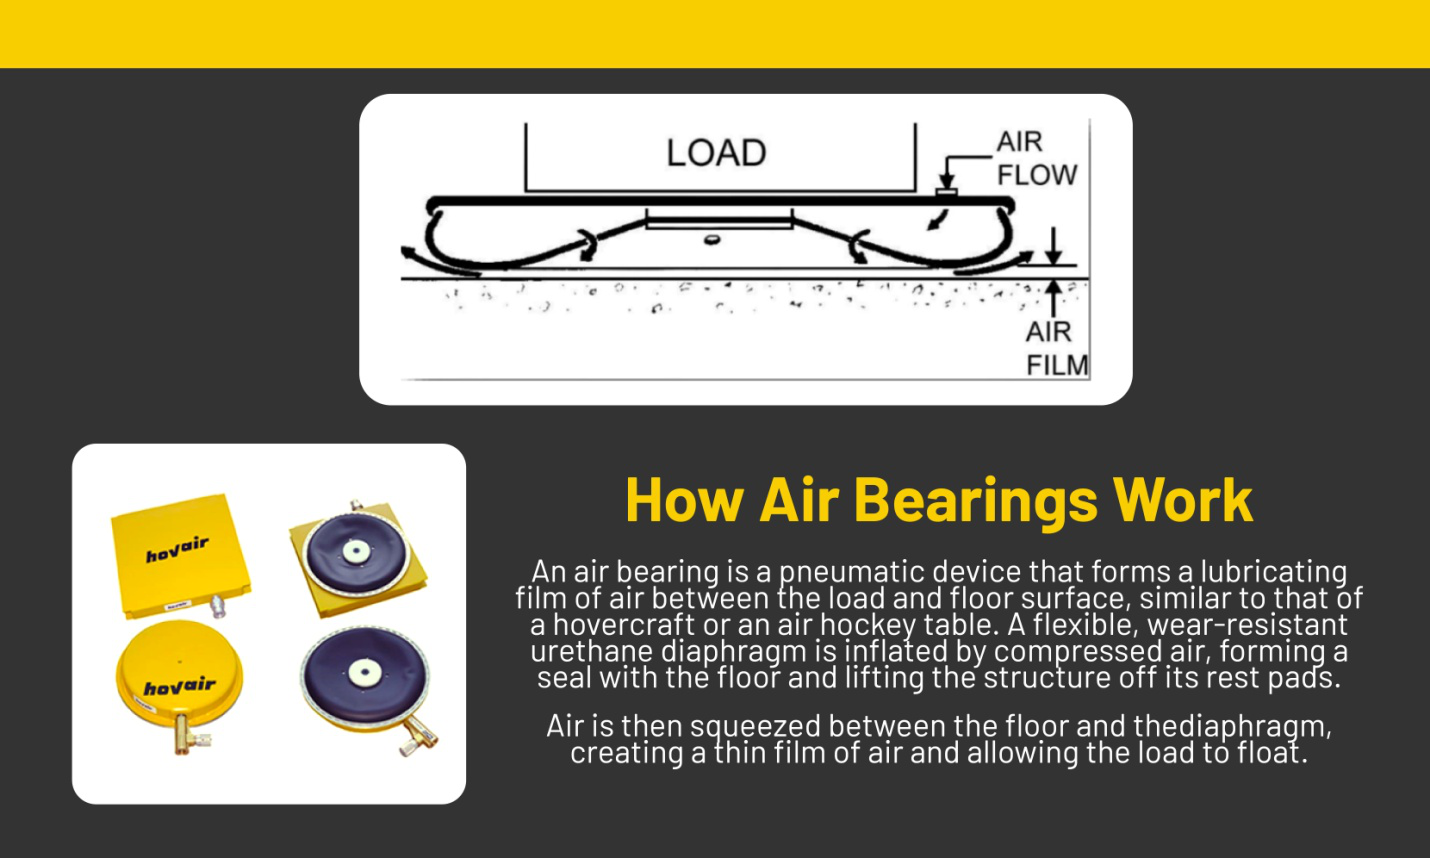 An infographic on how air bearings work